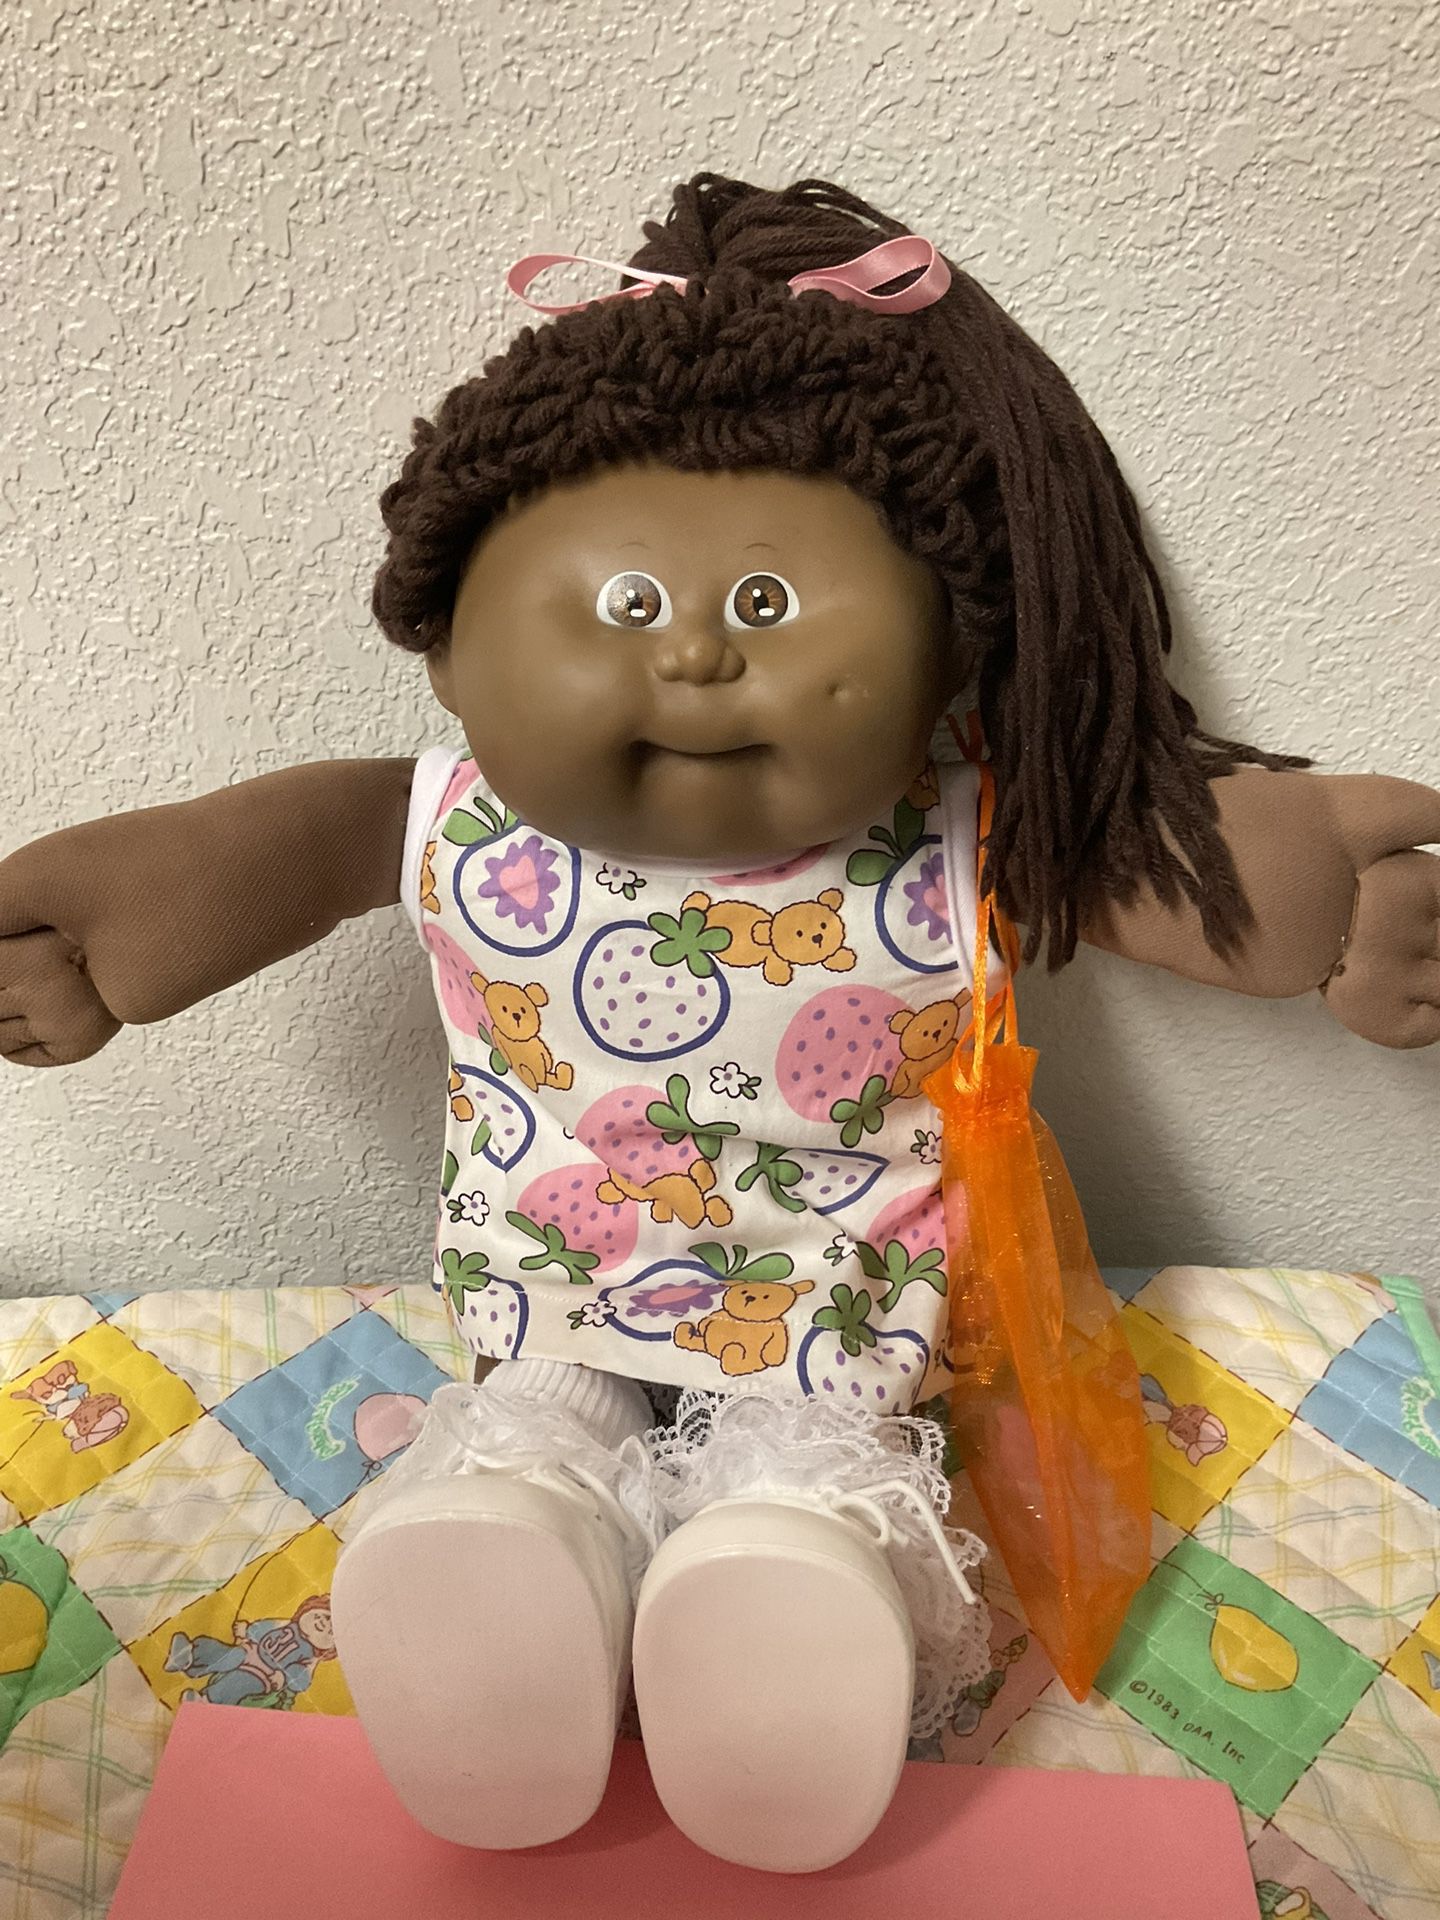 VERY RARE Vintage Cabbage Patch Kid Girl African American Head Mold #8 Brown Single Poodle Pony